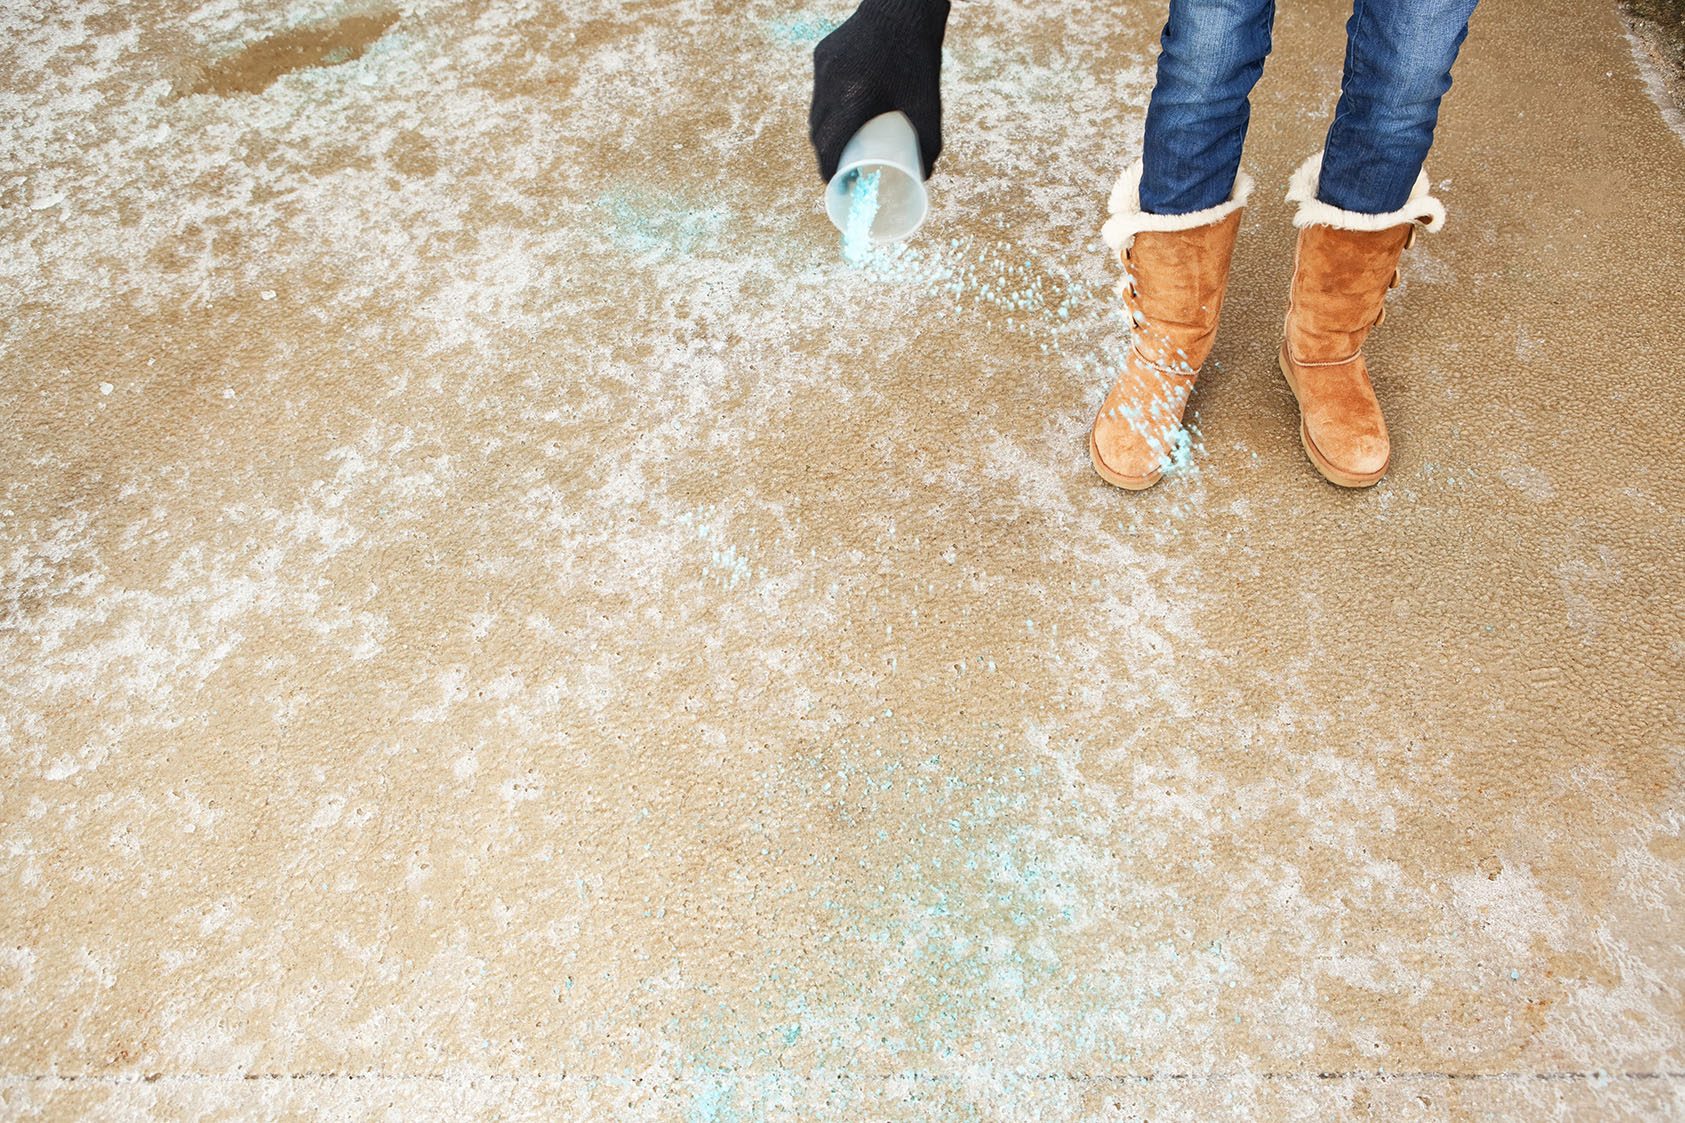 How To Melt Ice on Driveway With Salt or Ice Melts